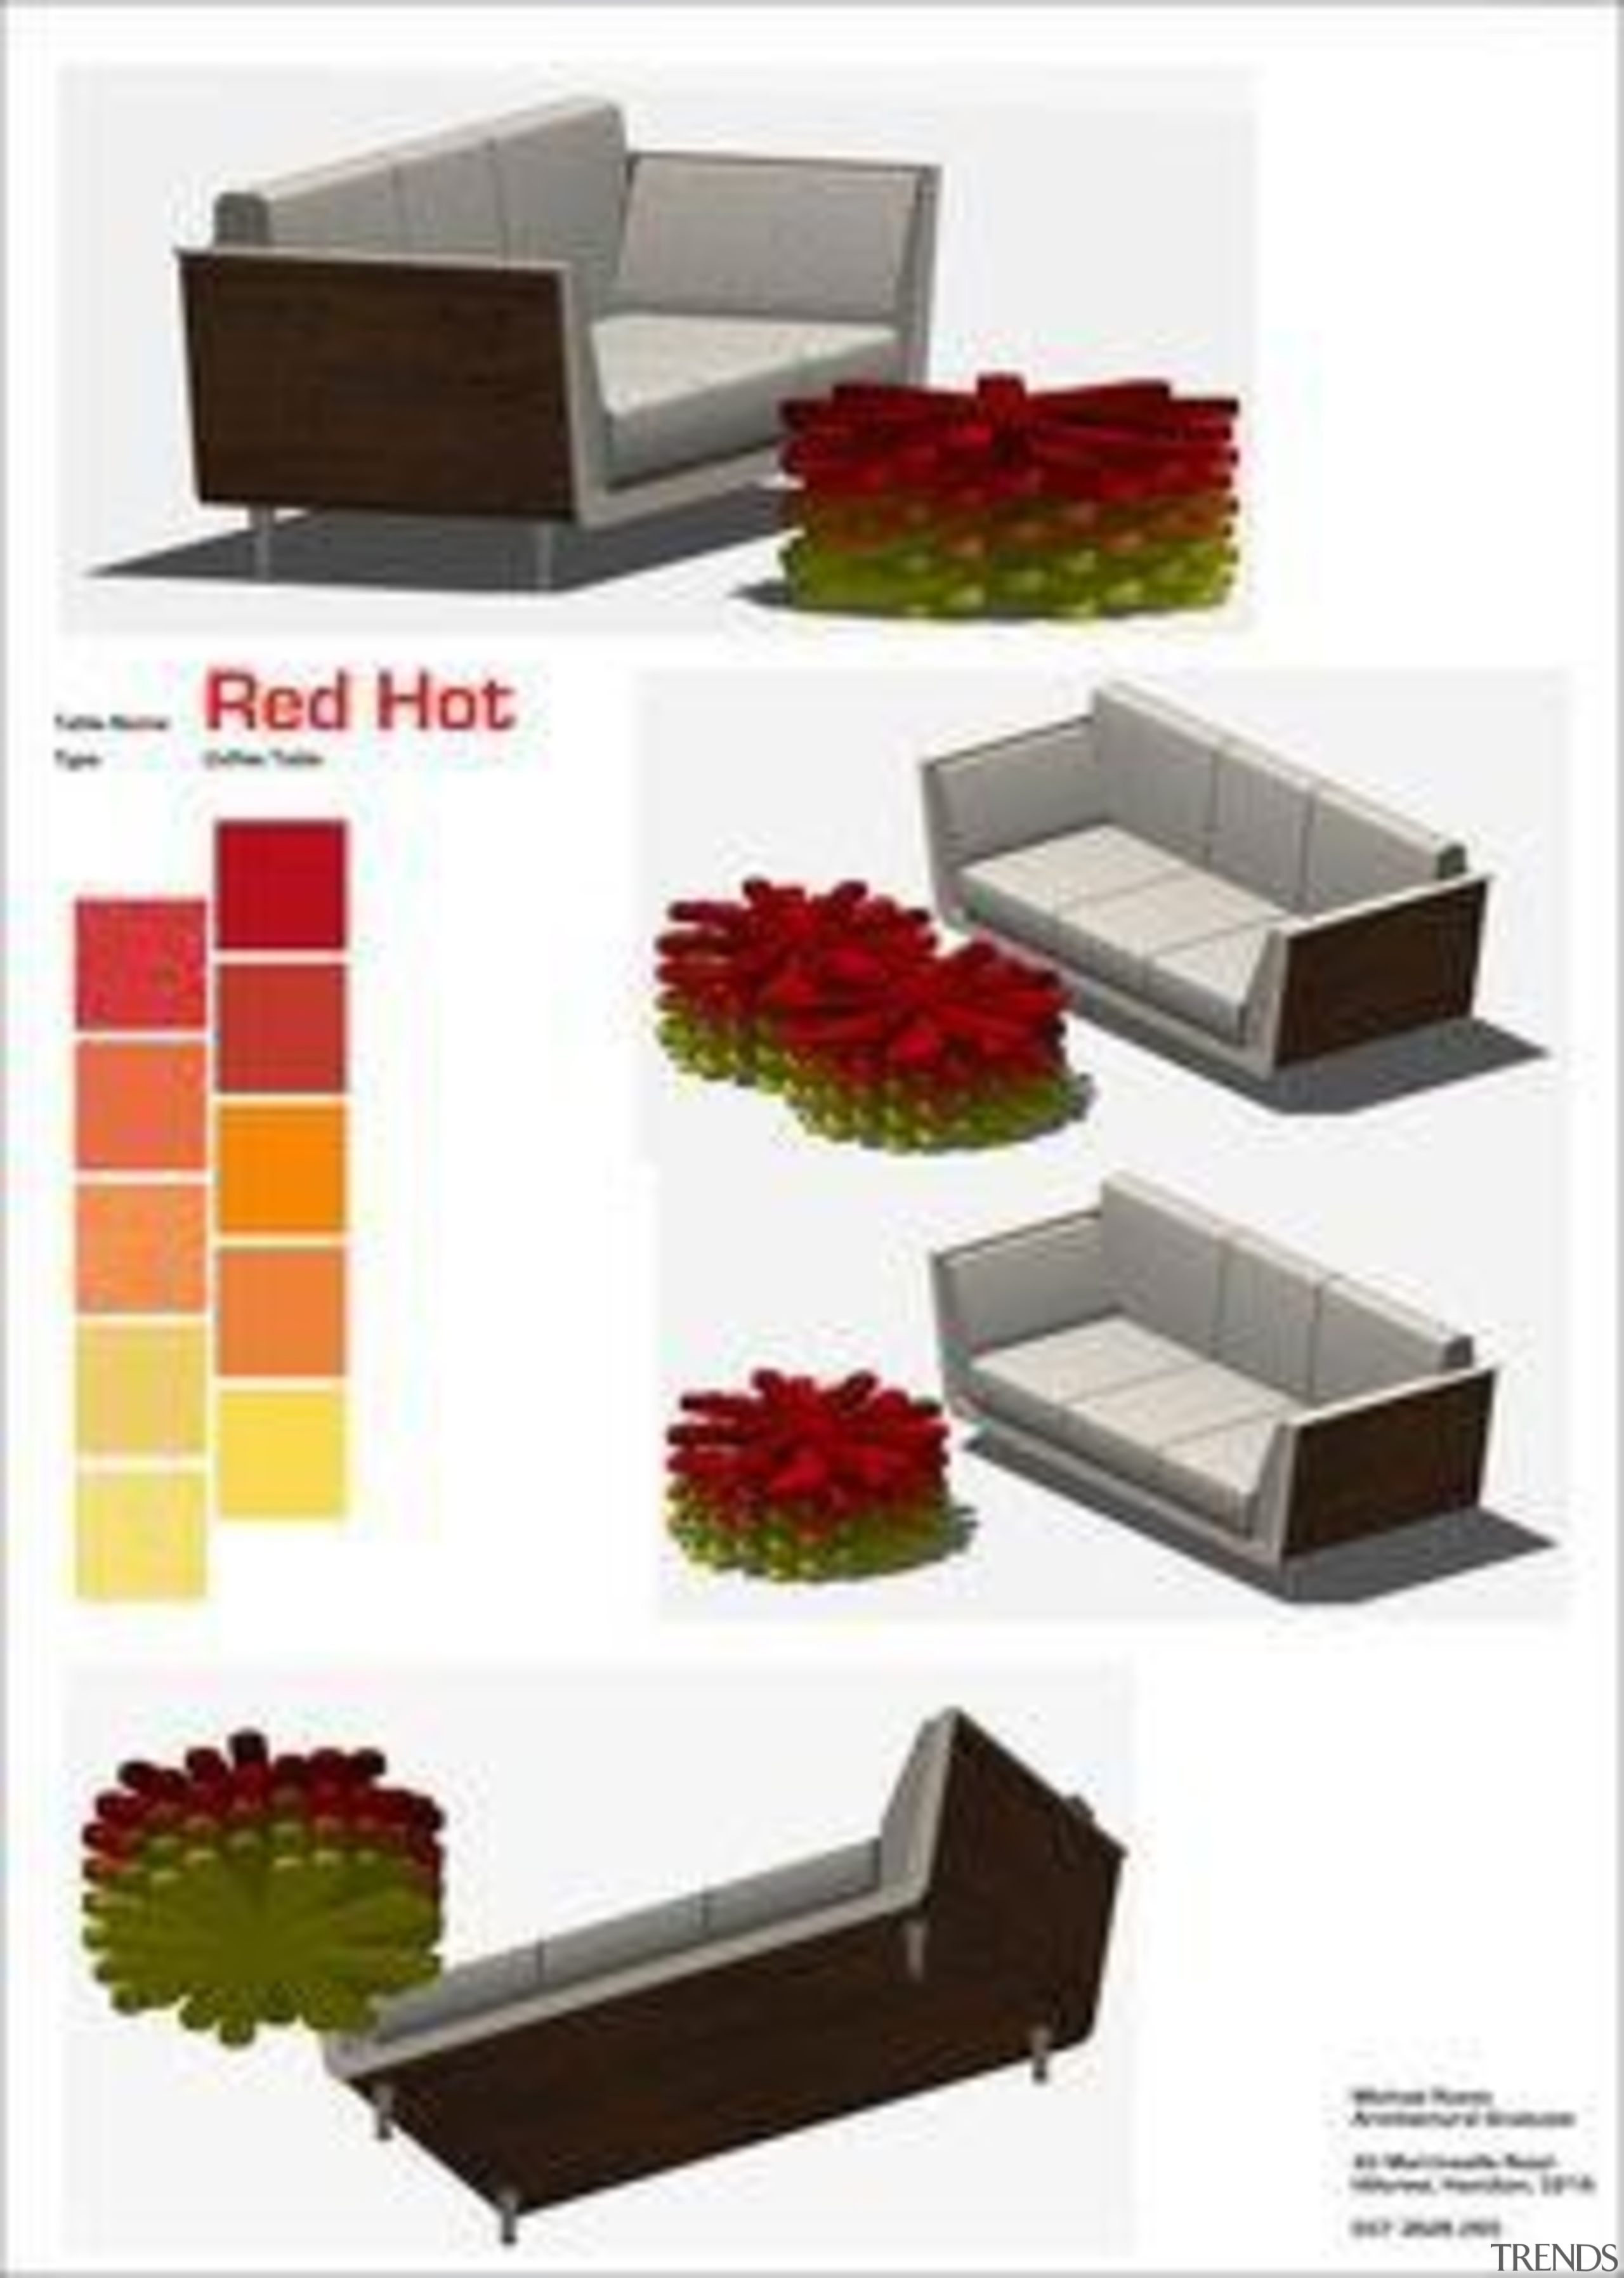 by Michael Russ - Red Hot Table - box, furniture, product, product design, table, white